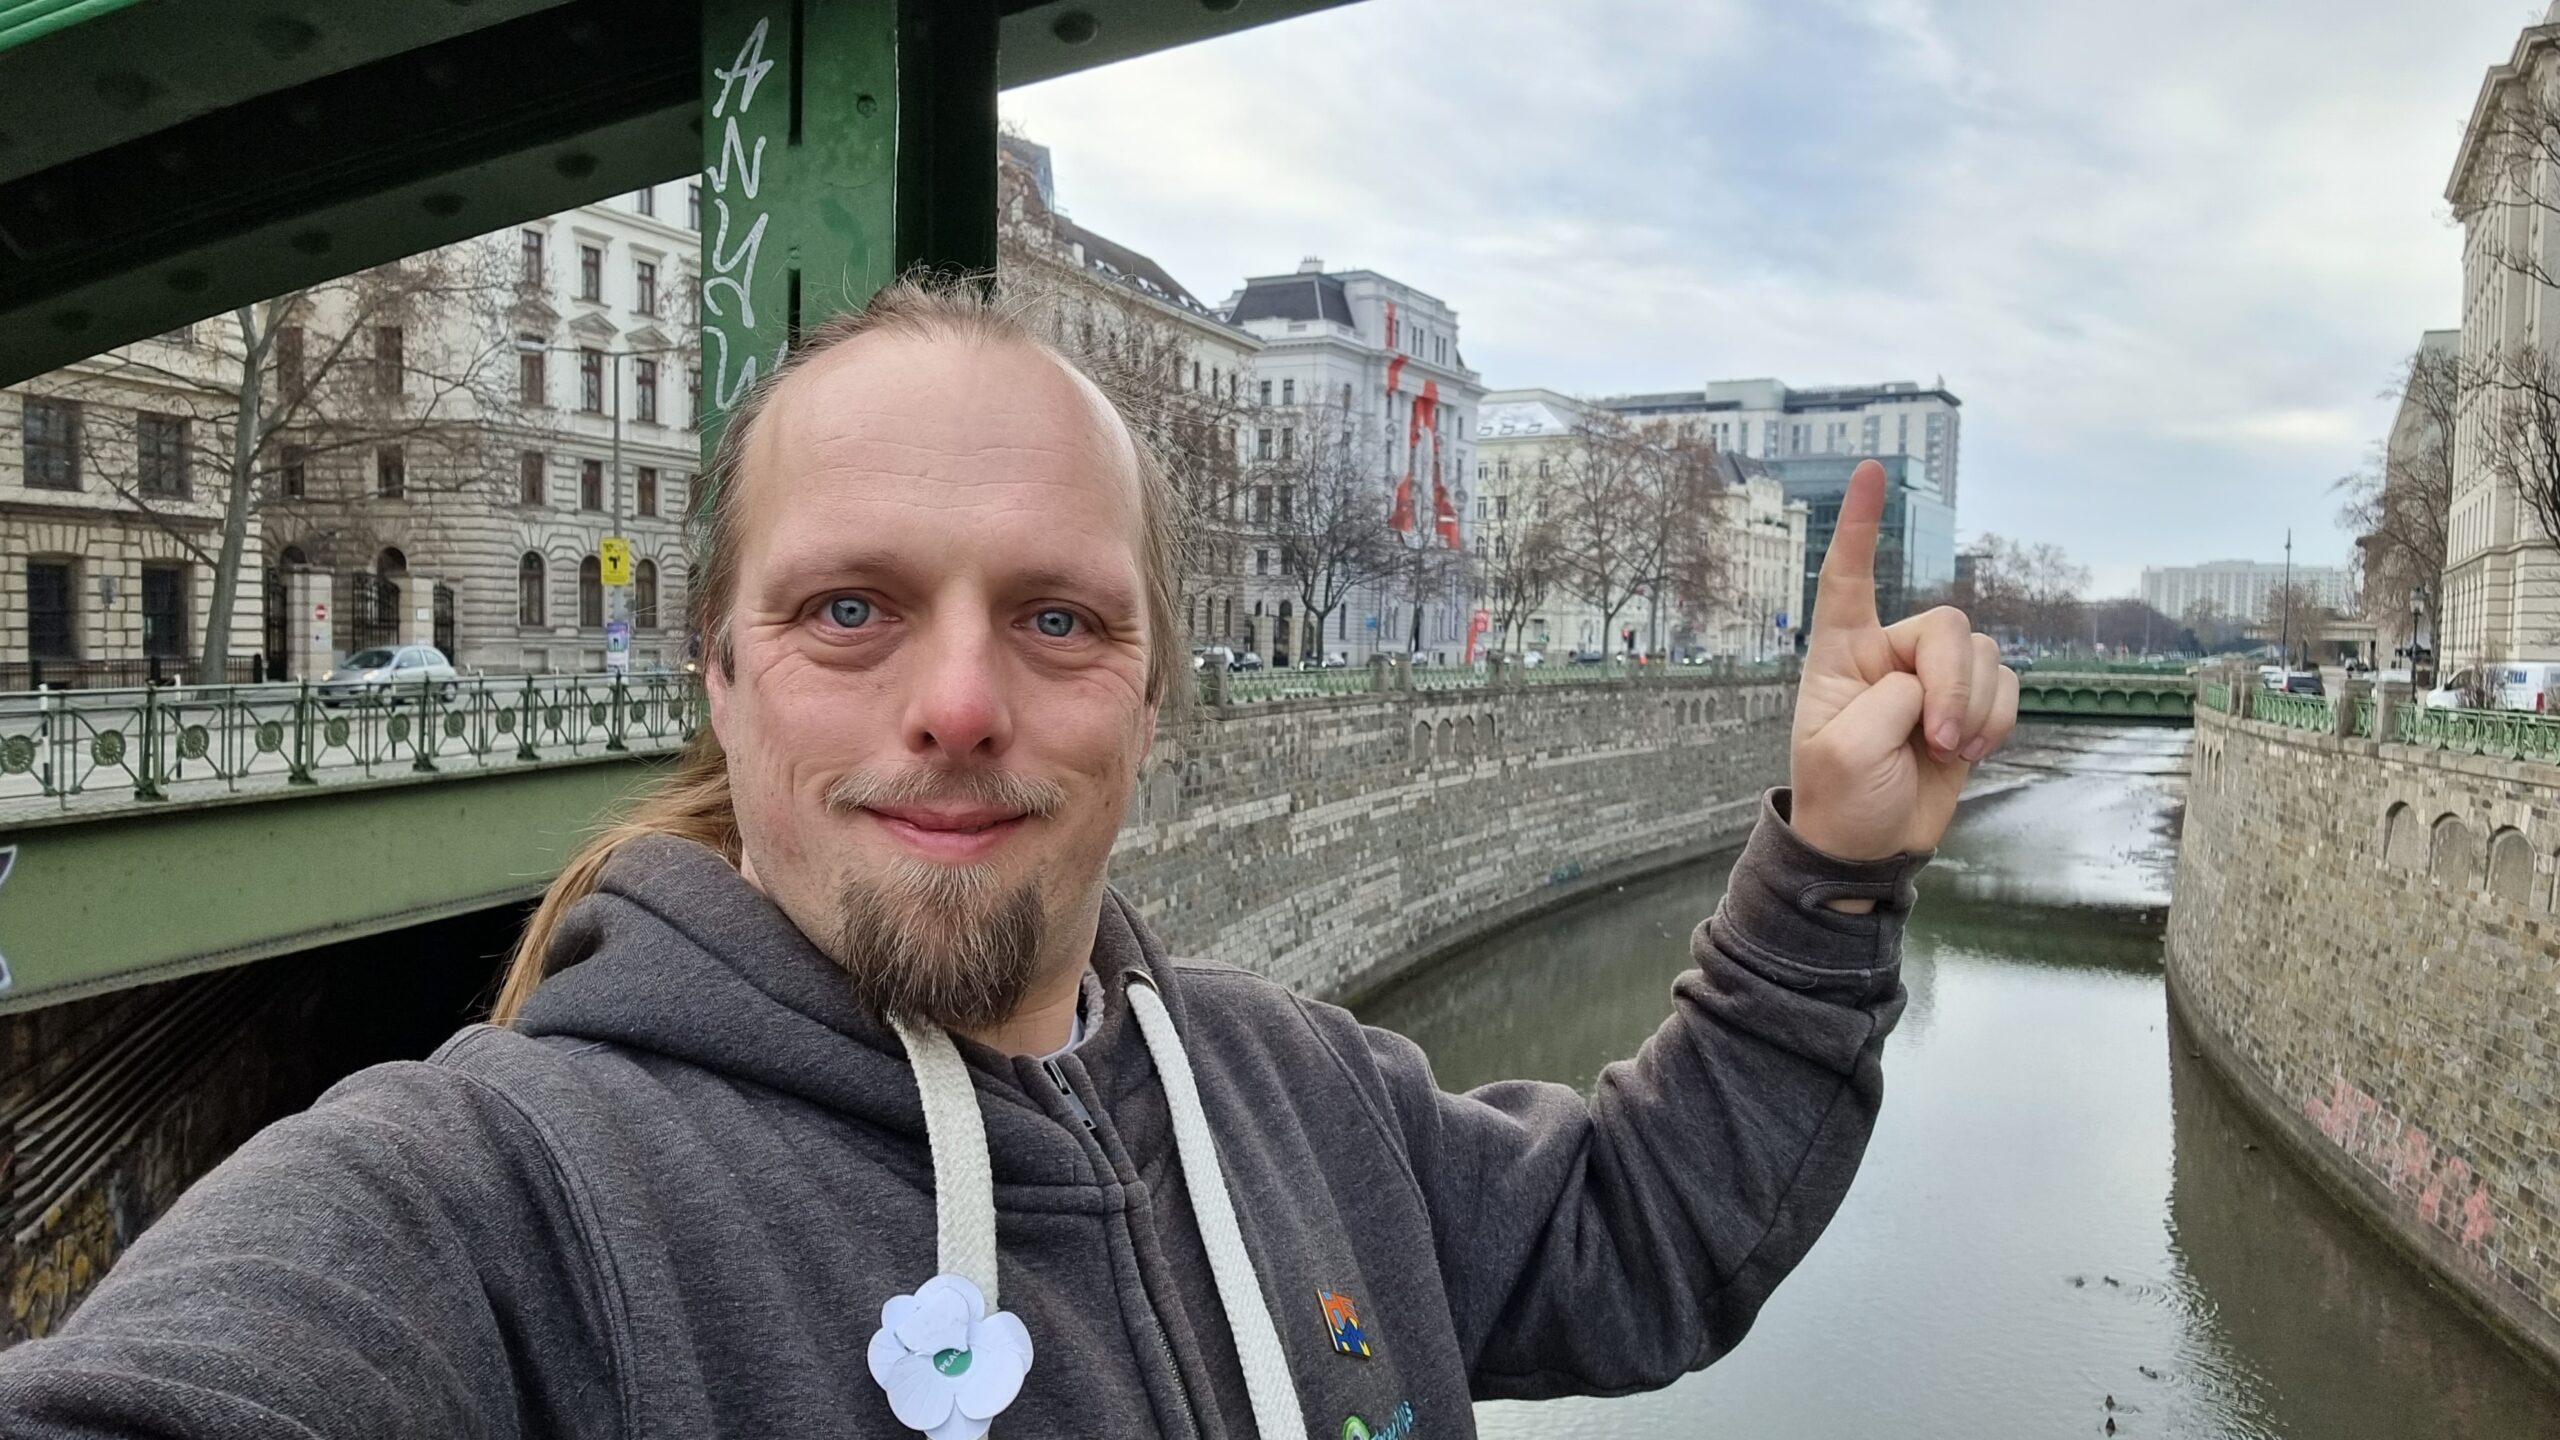 Dan stands on a bridge over the River Wein (before it meets the Danube), pointing to a window in the distance of a hotel.